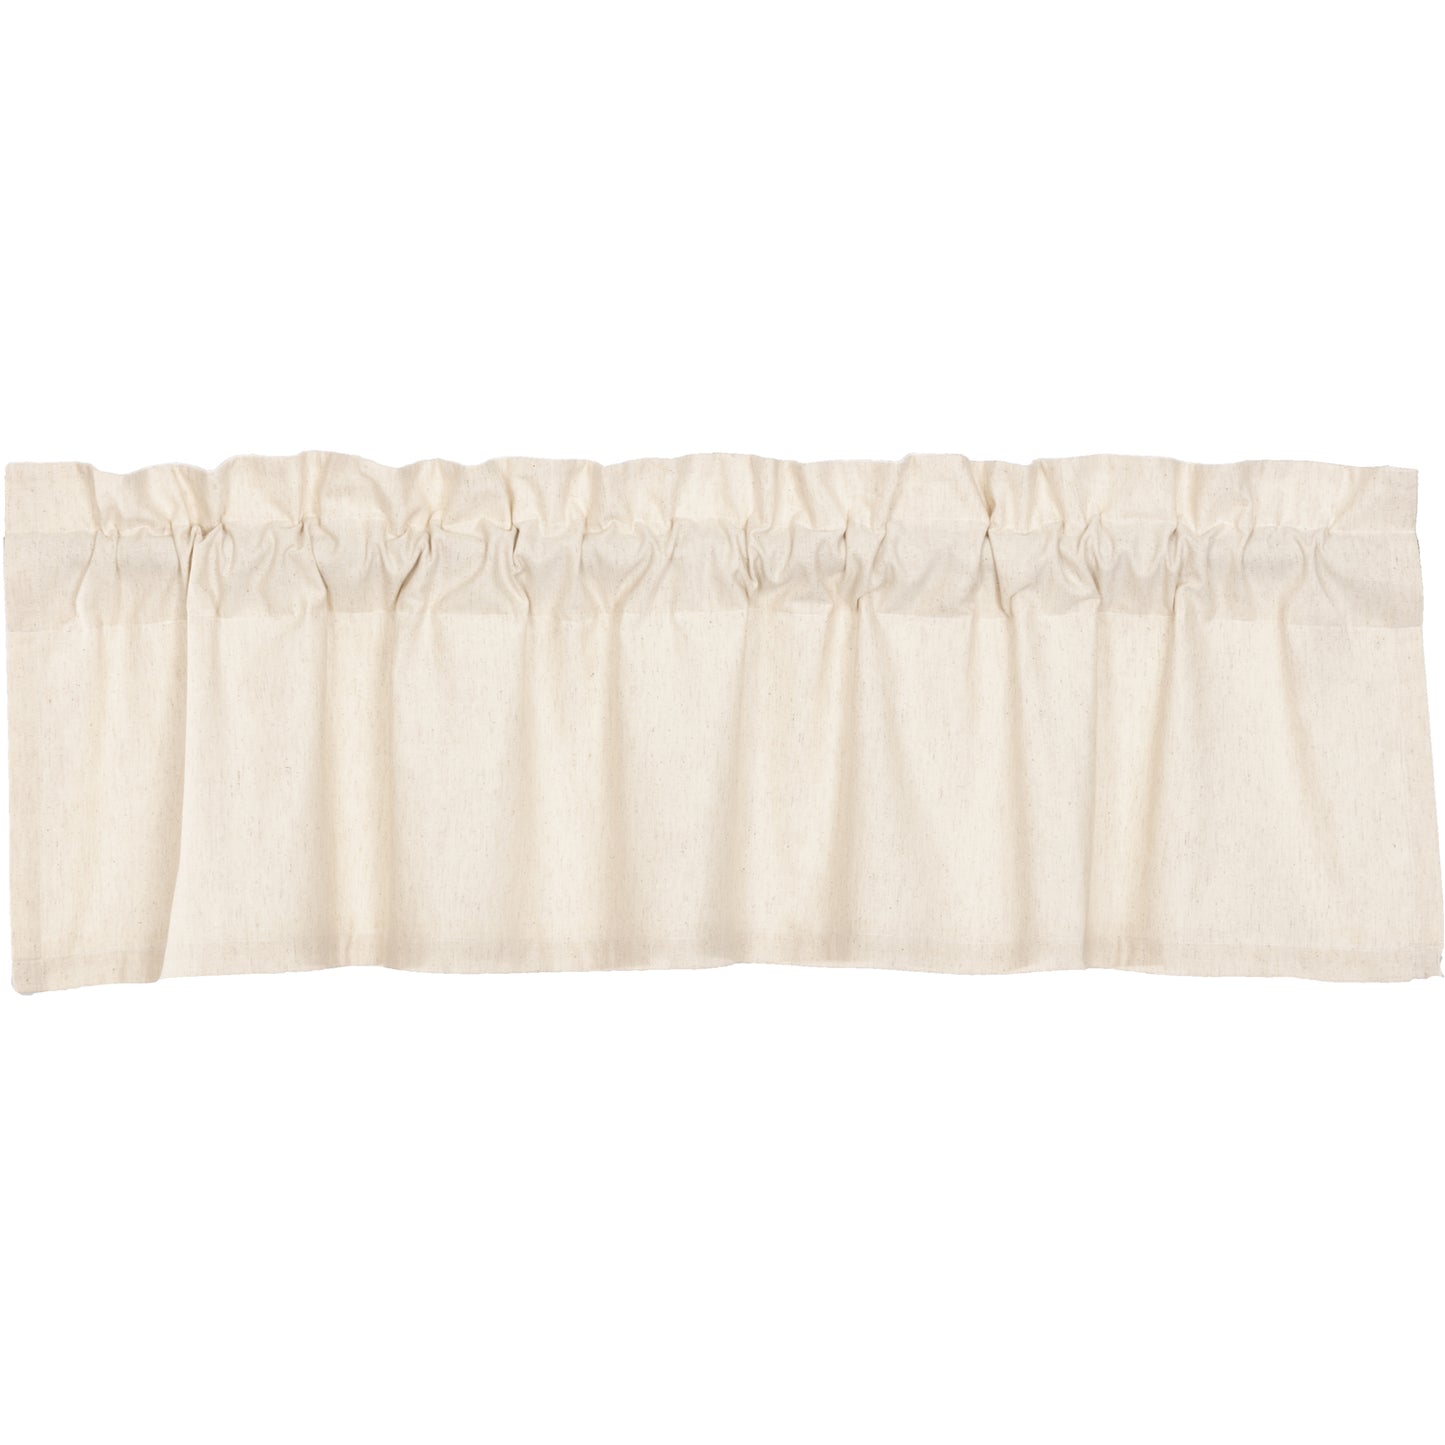 52301-Simple-Life-Flax-Natural-Valance-16x60-image-6